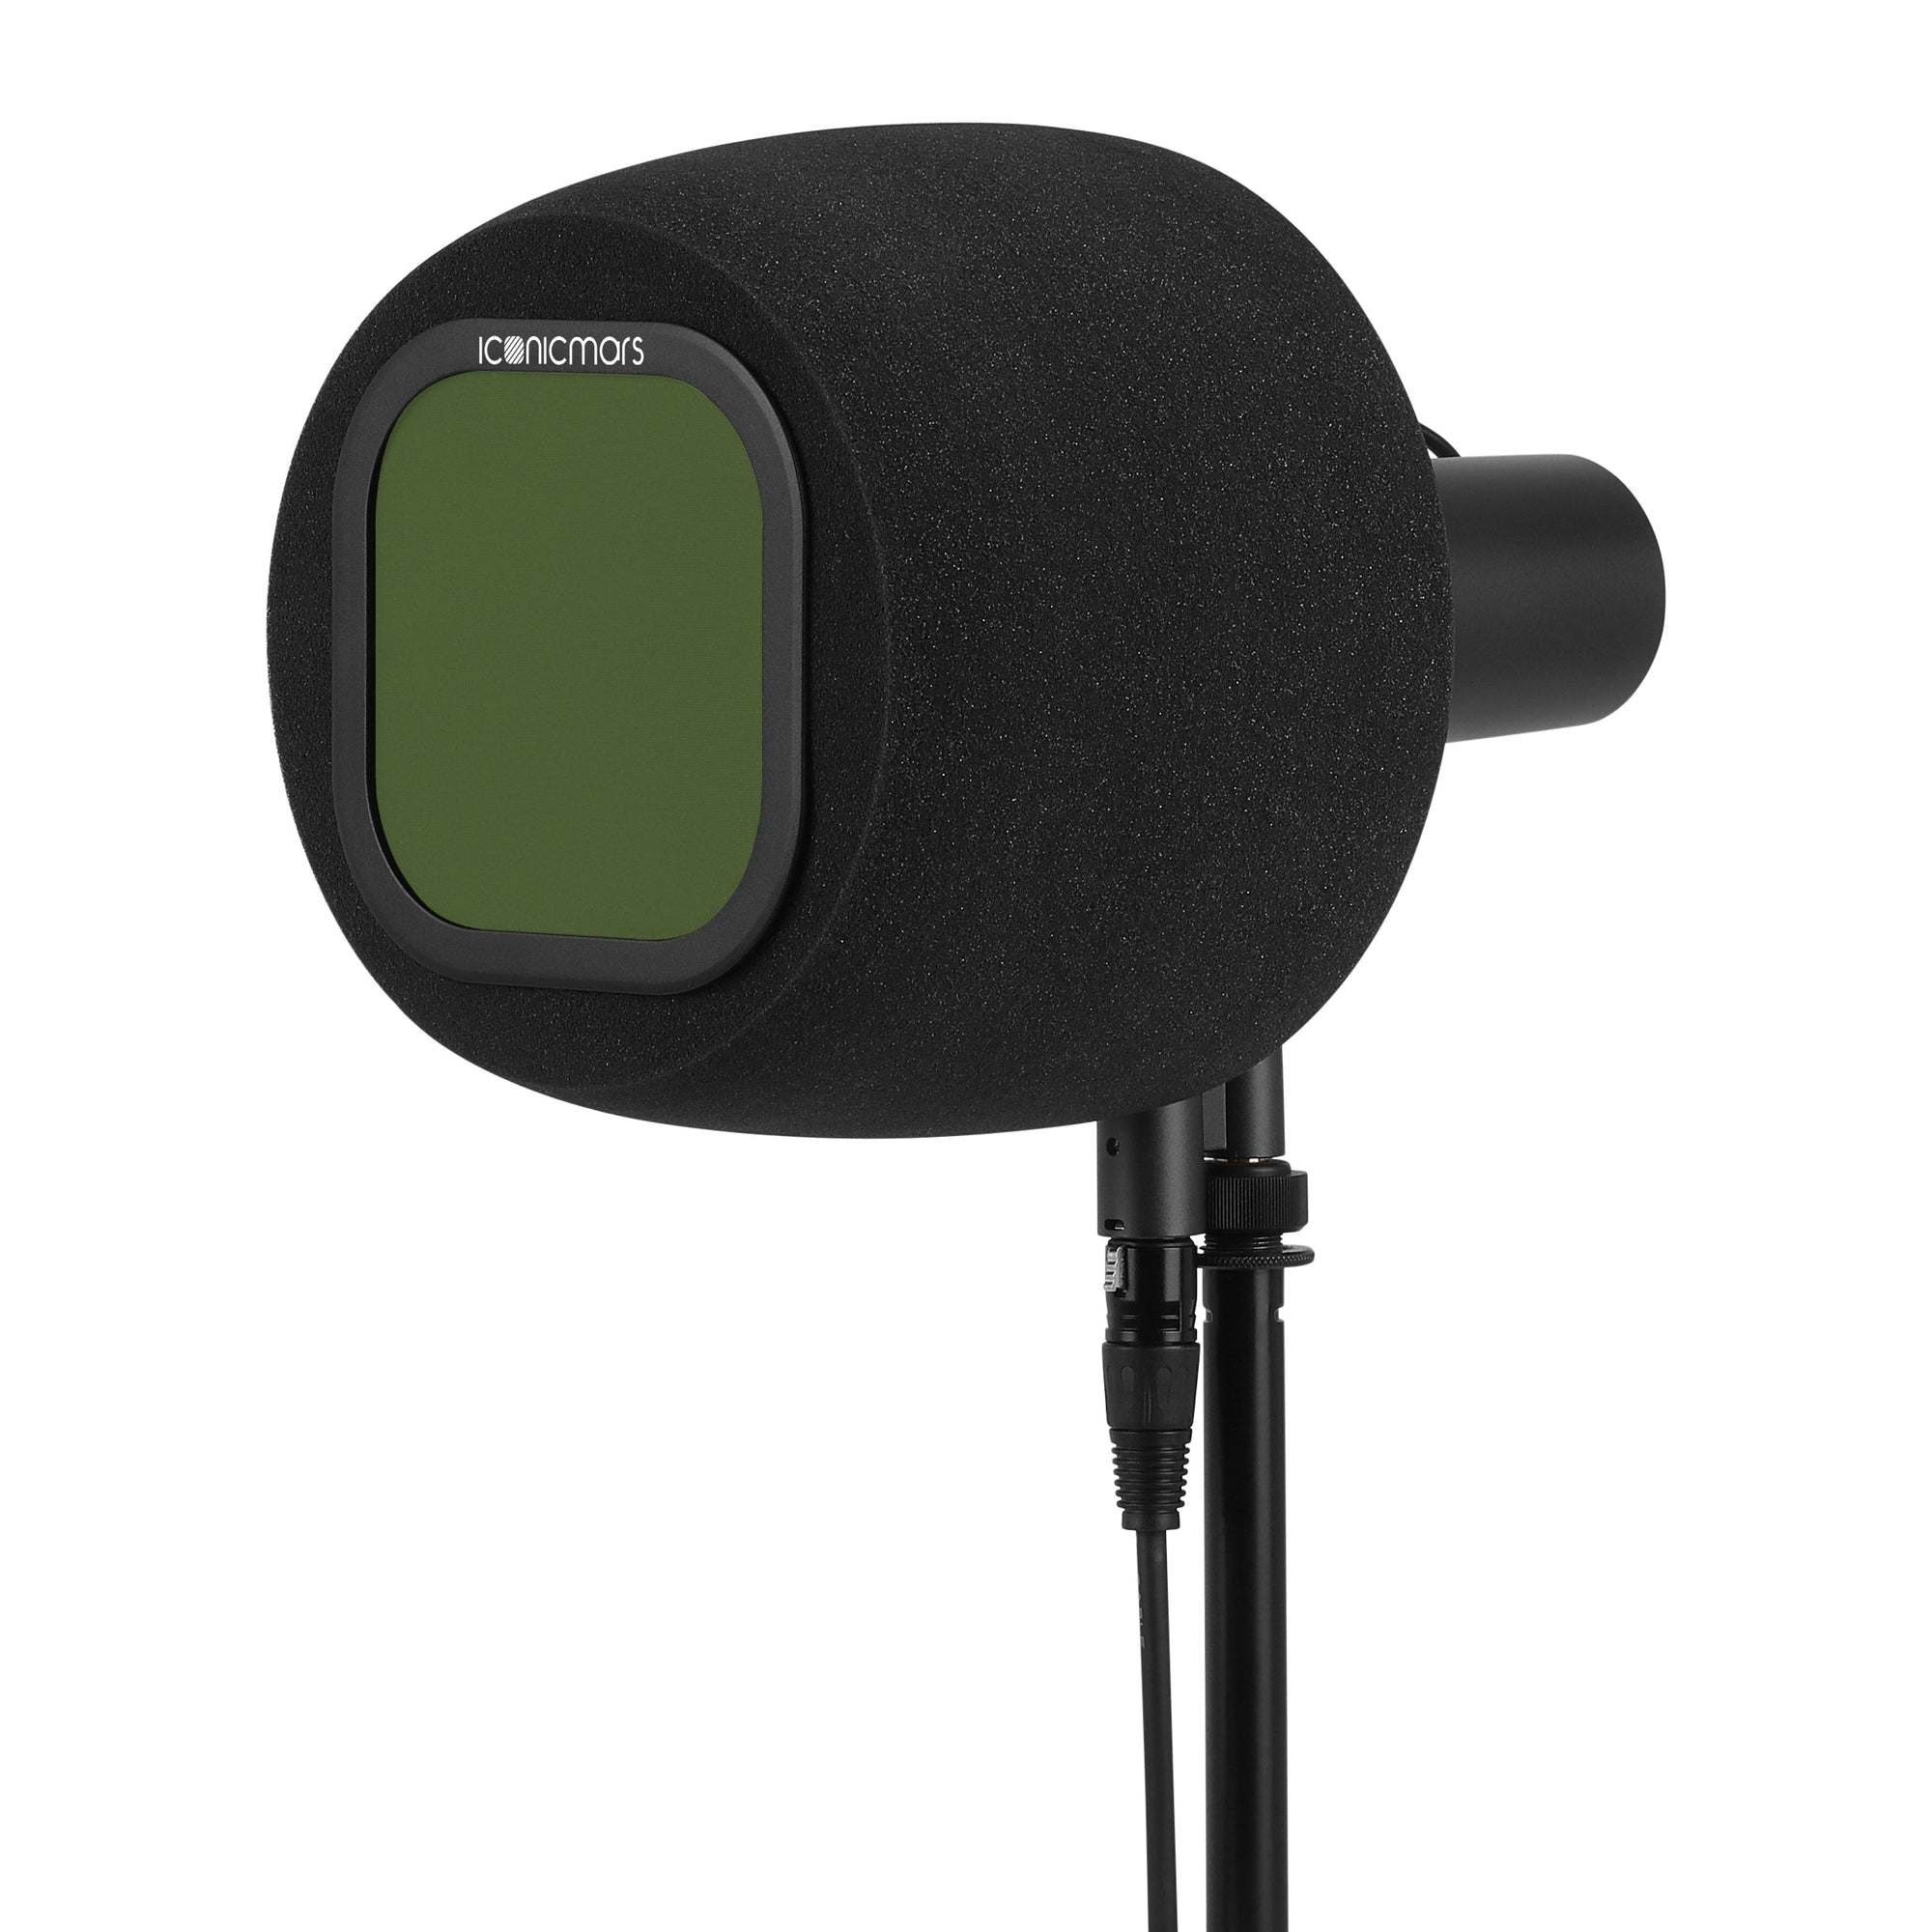 Comet X7B side with pop filter stand with eyeball like design for front facing microphone like Shure SM7B  -- Olive Green